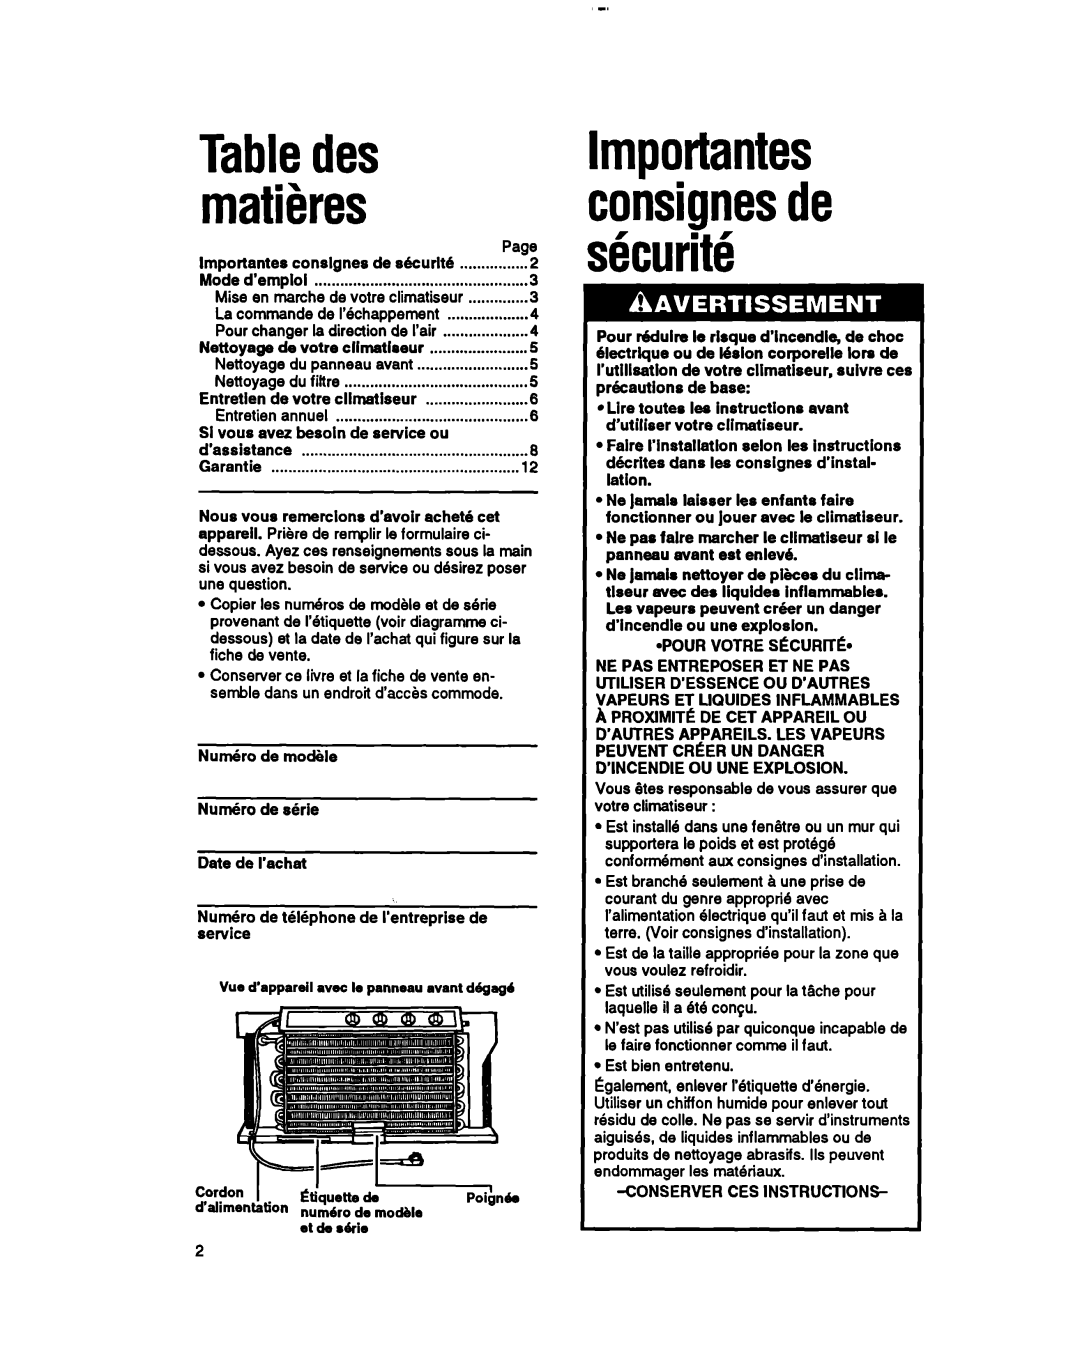 Whirlpool RH123A1 manual Tabledes, maths, Importantes consignesde sQcurit6 